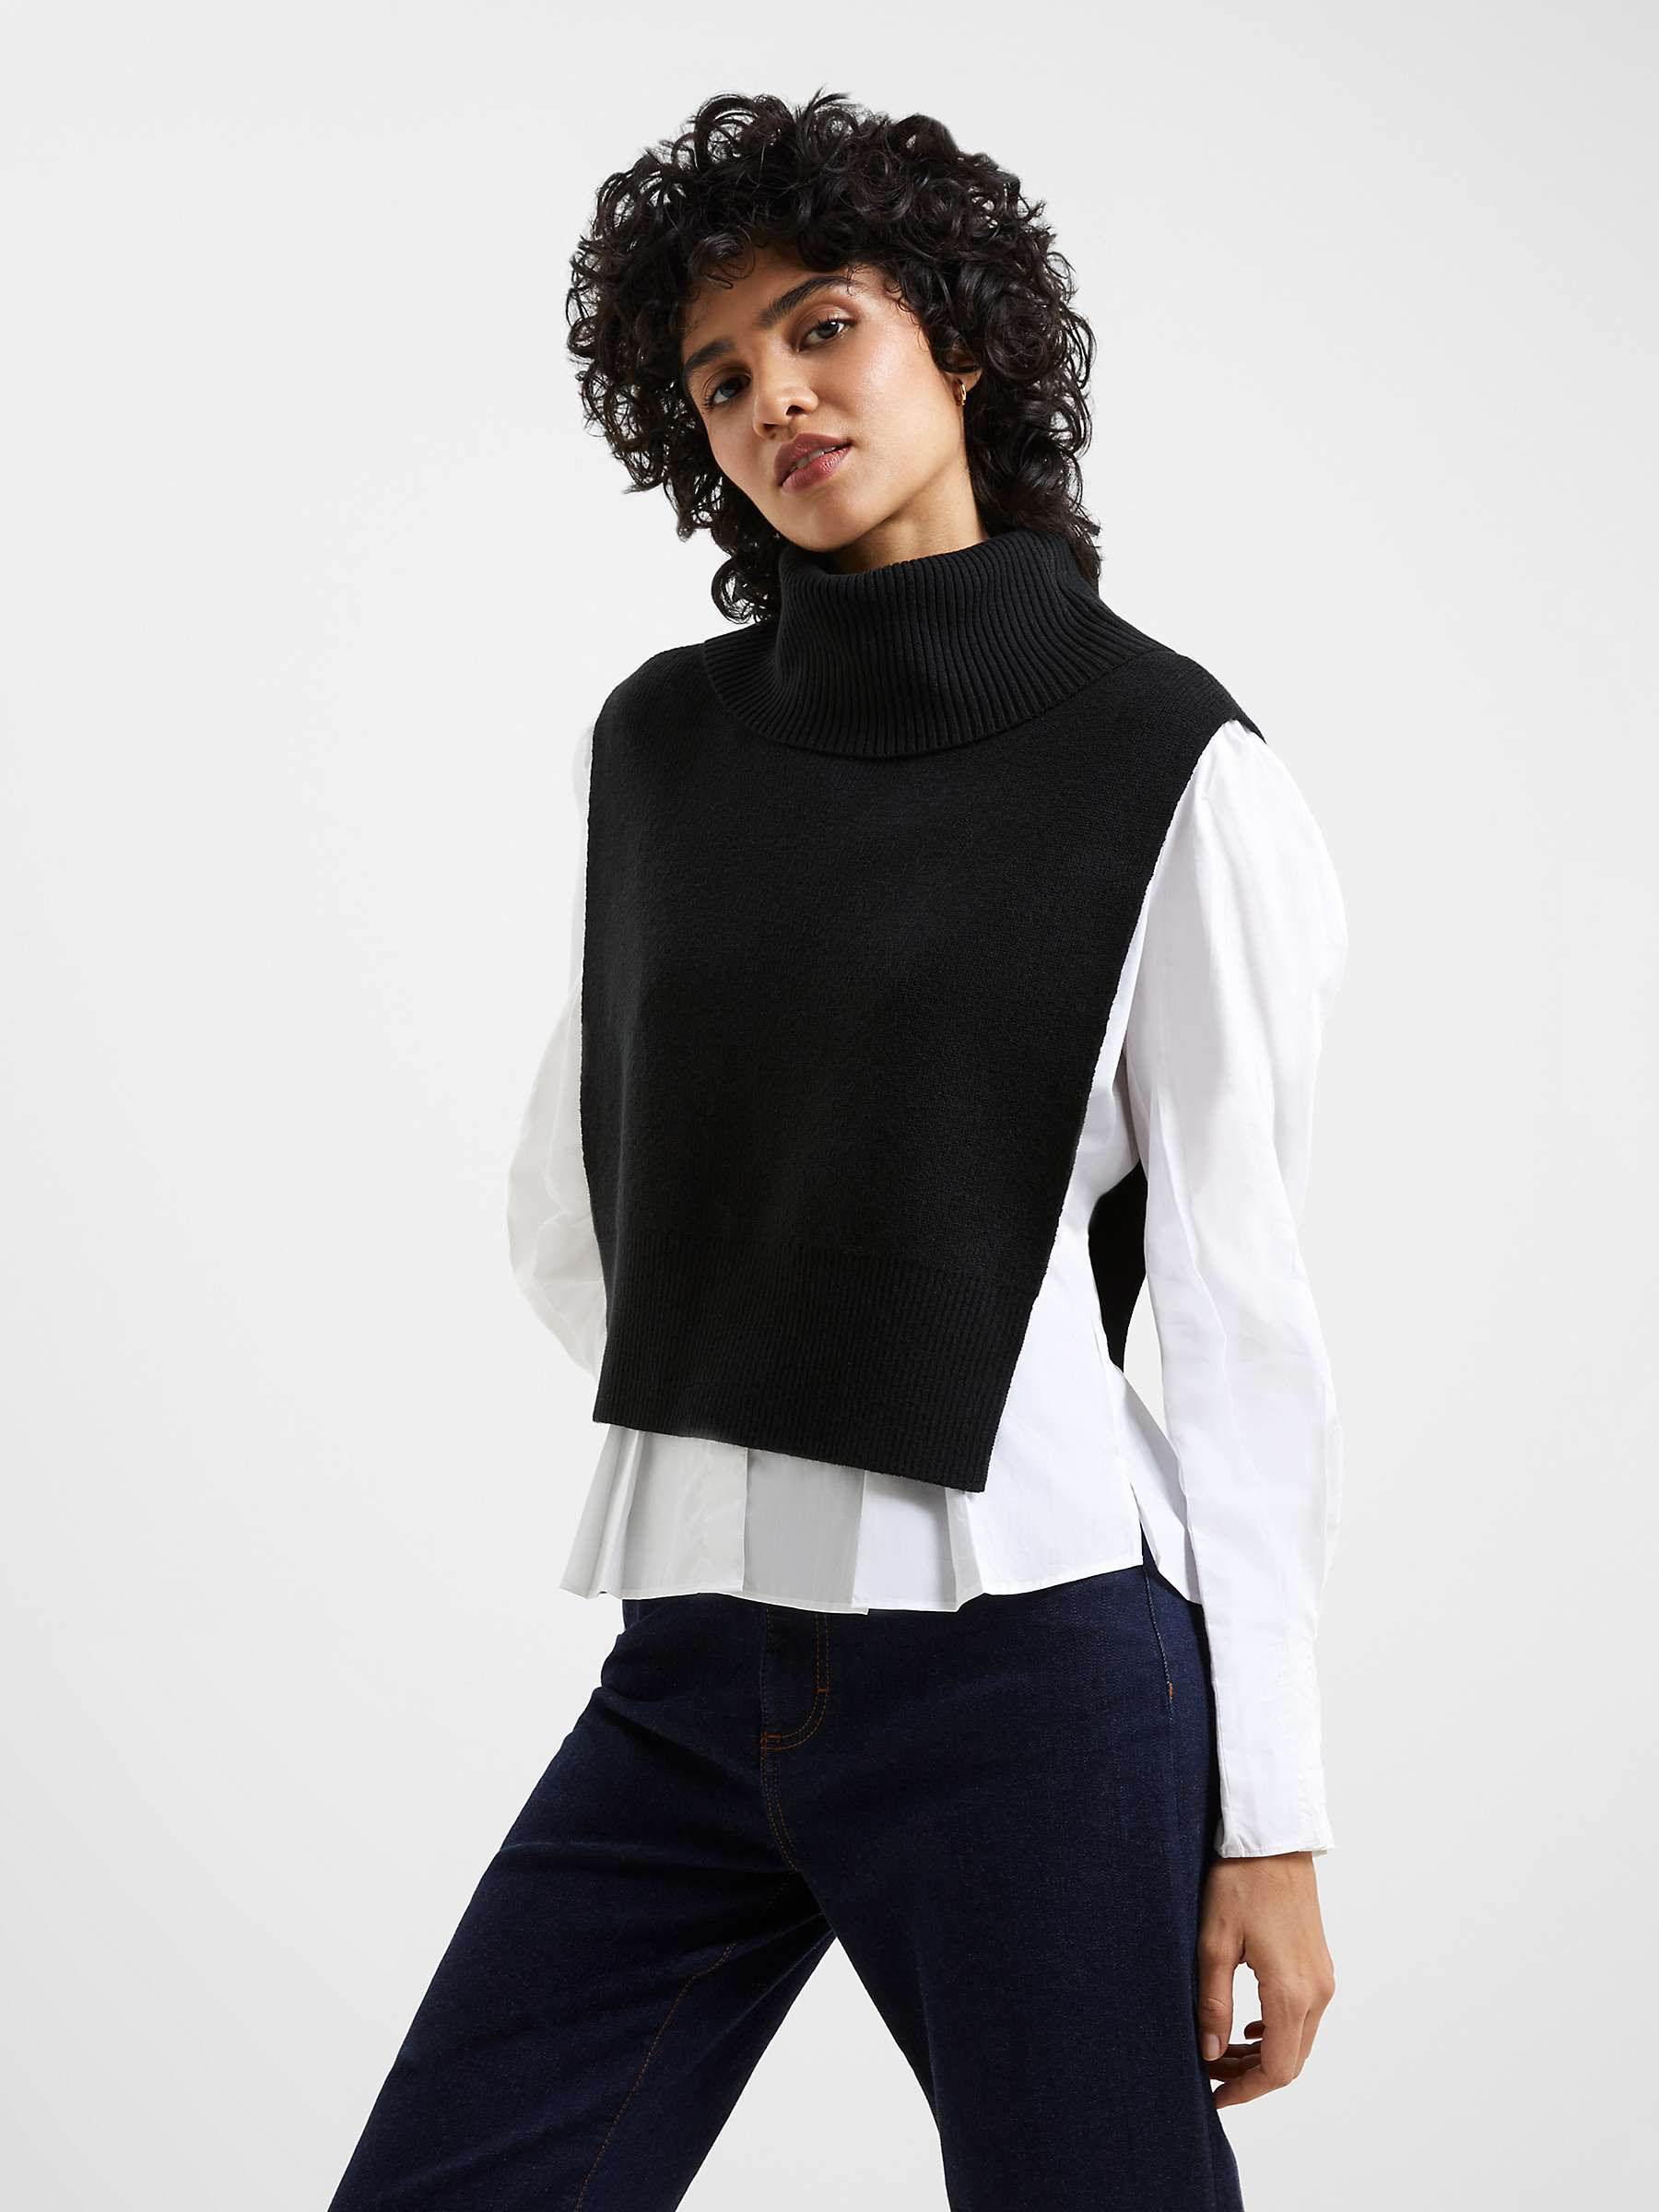 Buy French Connection Short Roll Neck Cloak Online at johnlewis.com